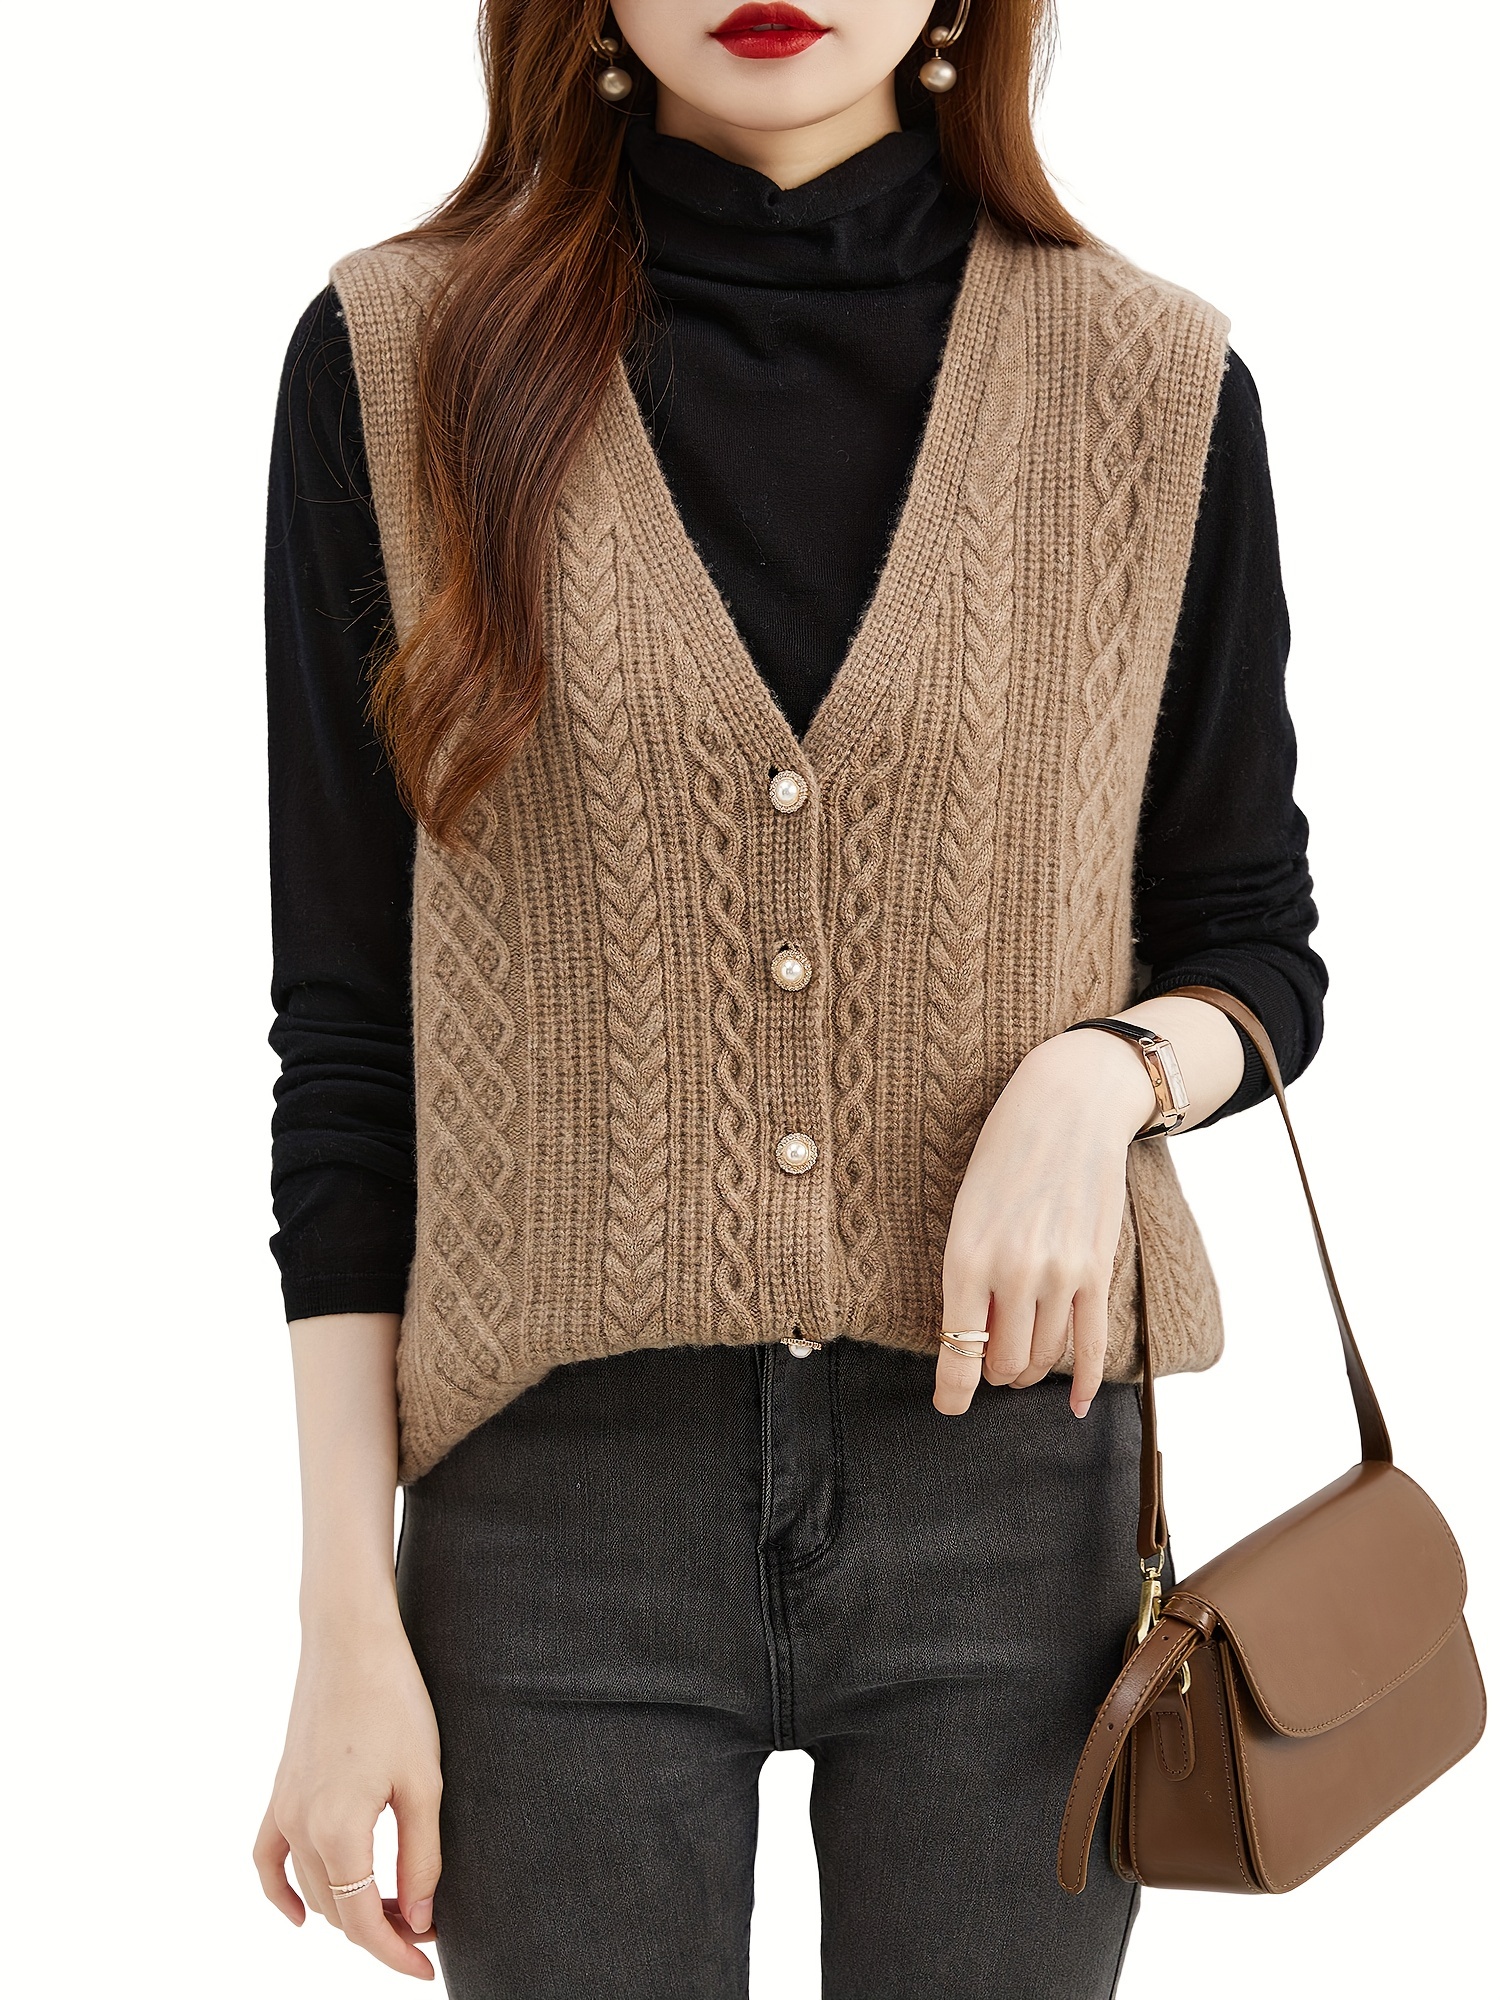 Solid Sleeveless Knit Cardigan, Casual Simple Long Length Vest Sweater,  Women's Clothing